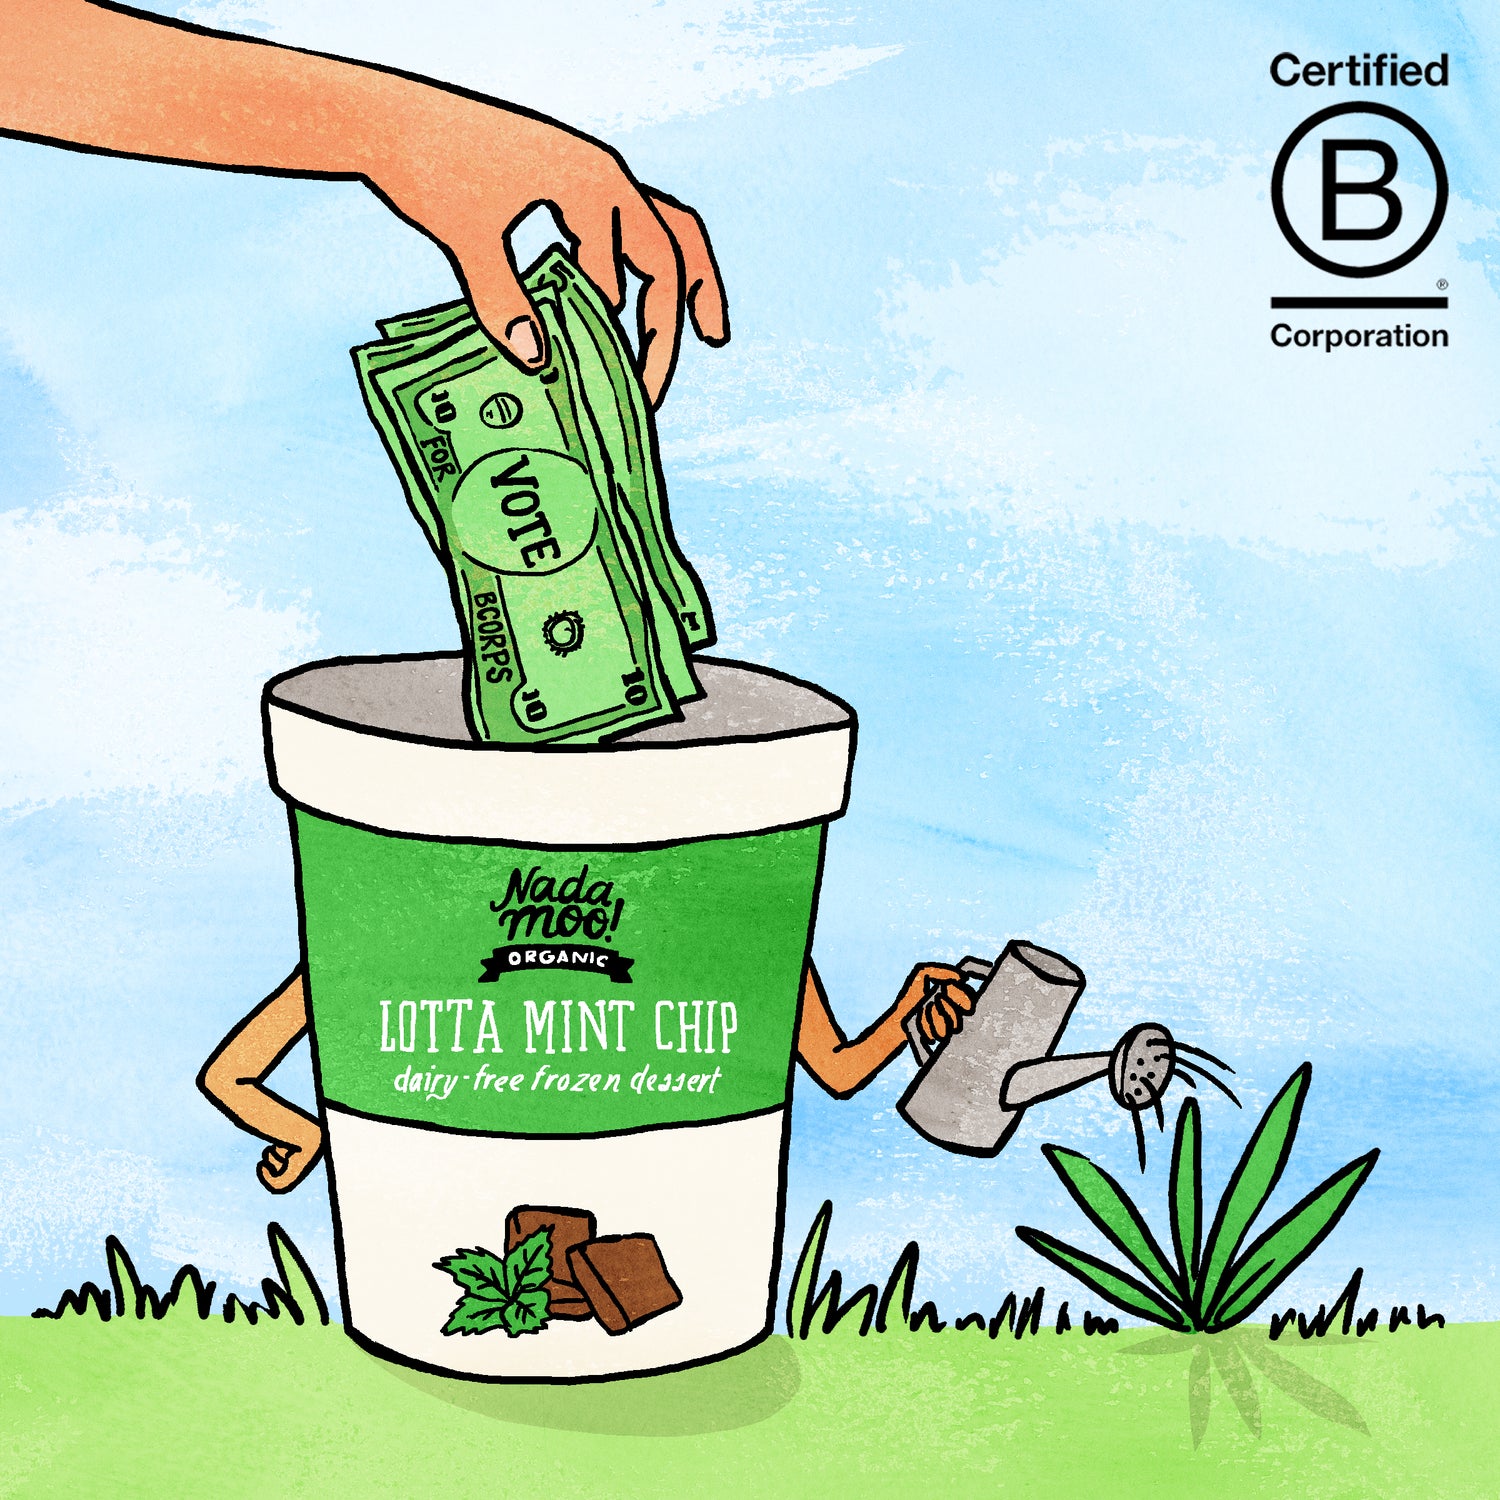 Blue sky, green grass, pint of NadaMoo! Lotta Mint Chip frozen non-dairy dessert is watering a plant, hand reaches in from top left corner putting money bills into the pint. Bills say "vote for B Corps". Certified B Corporation logo in top right corner